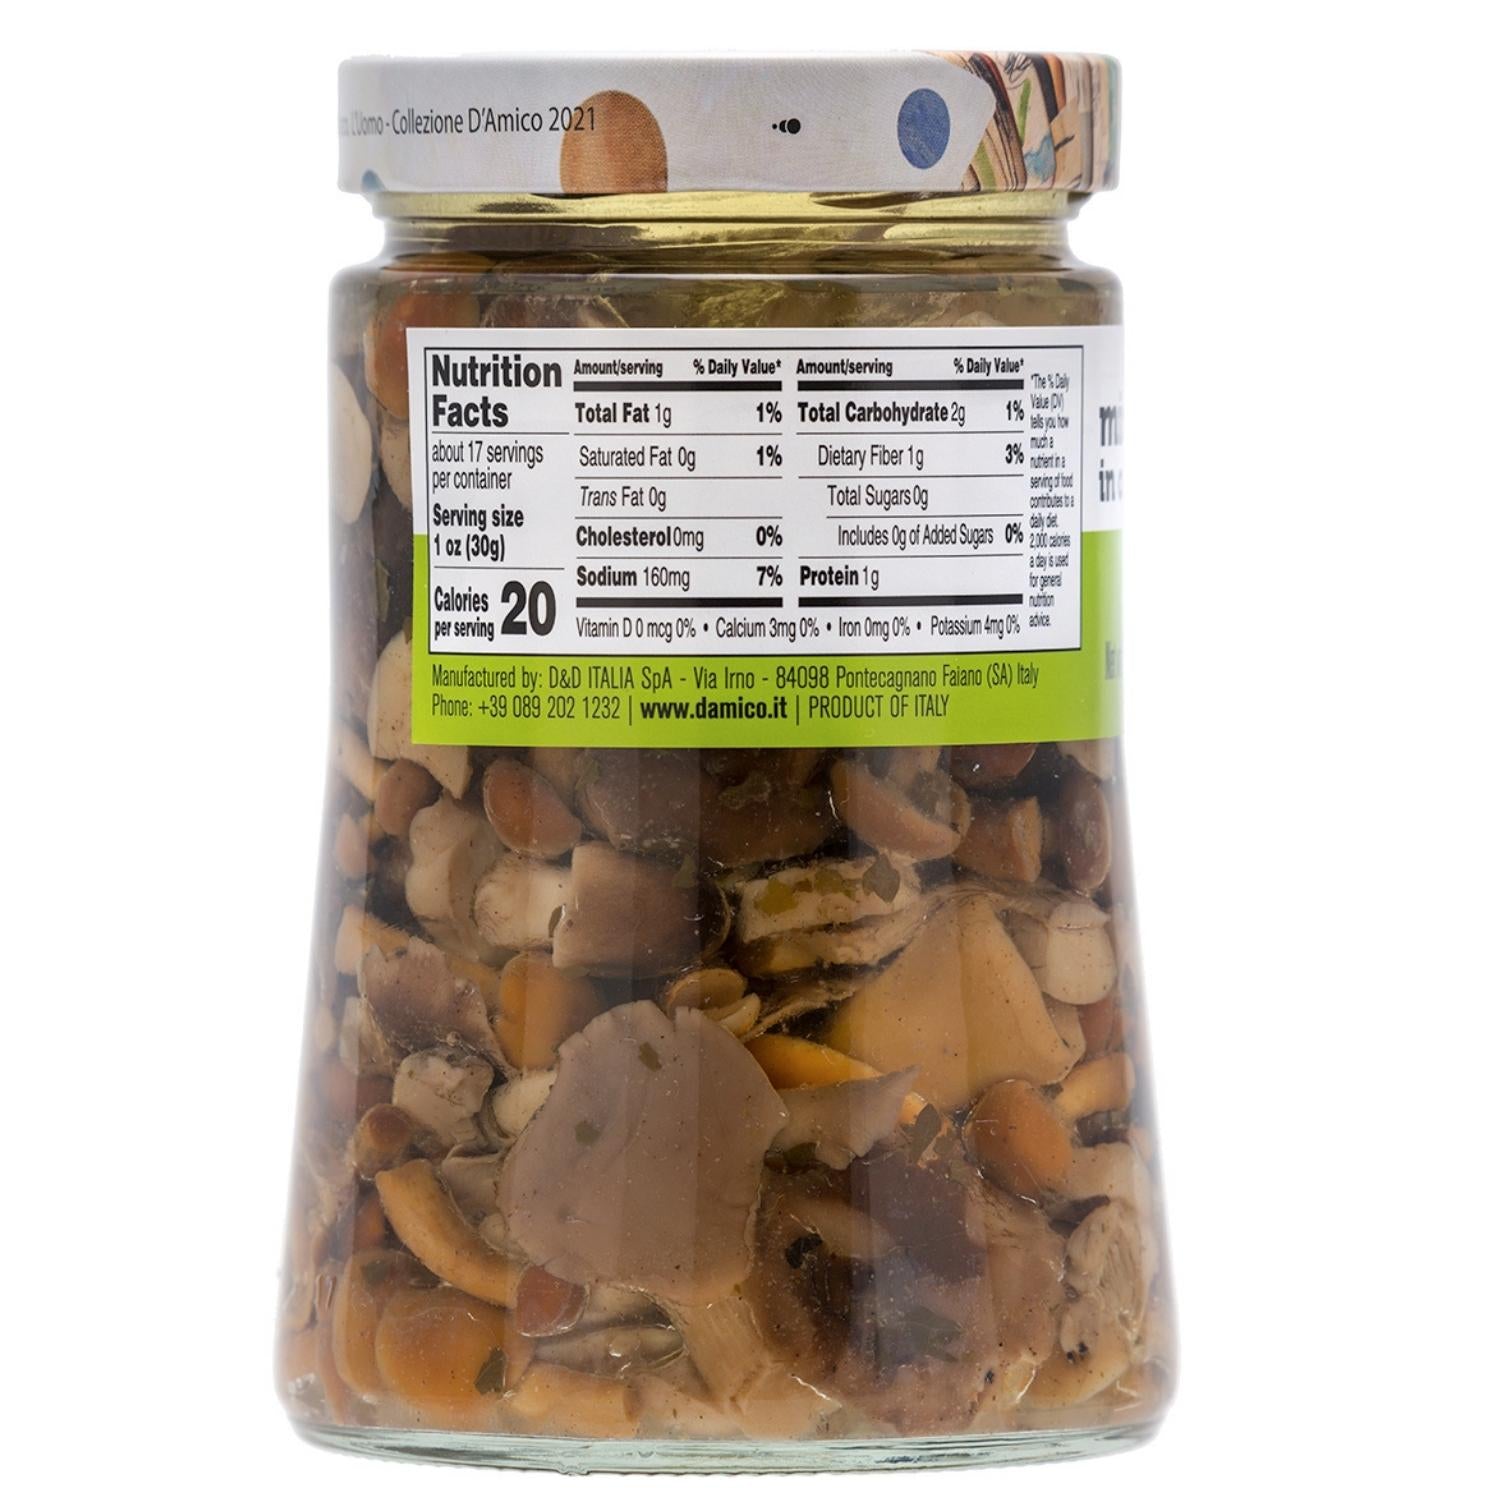 Mixed Mushrooms in oil, Family-Size, 24.7 oz (700 g), Italian appetizer, NON-GMO, by Fratelli D' Amico. Product of Italy.